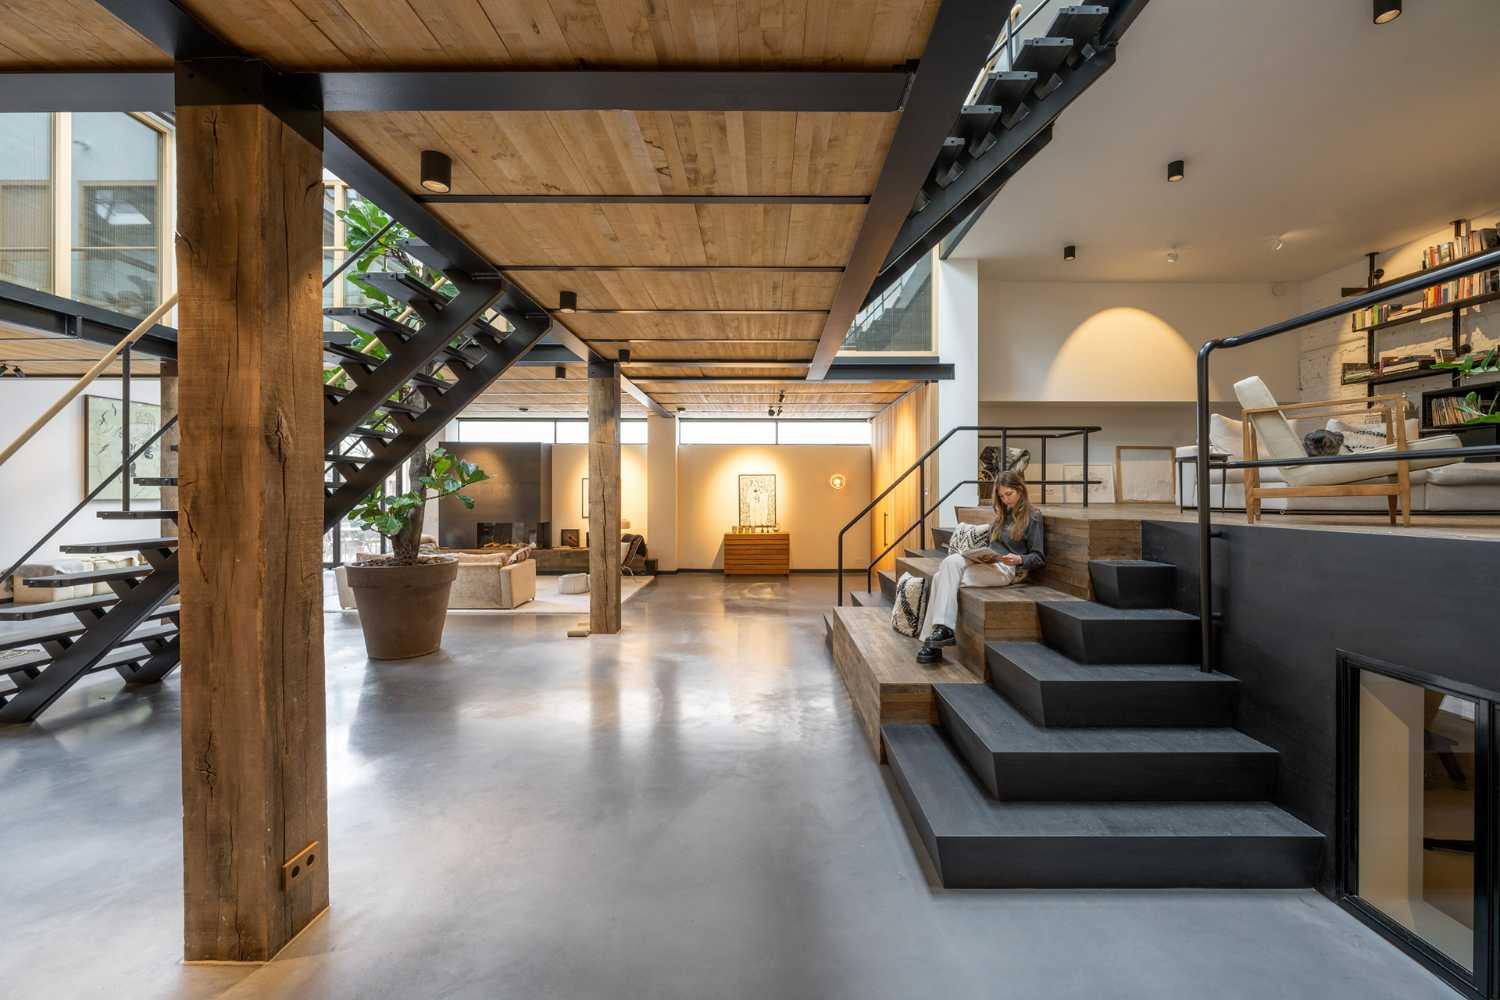 The gymnasium. A gymnasium transformed into a bright and intimate loft with an industrial style